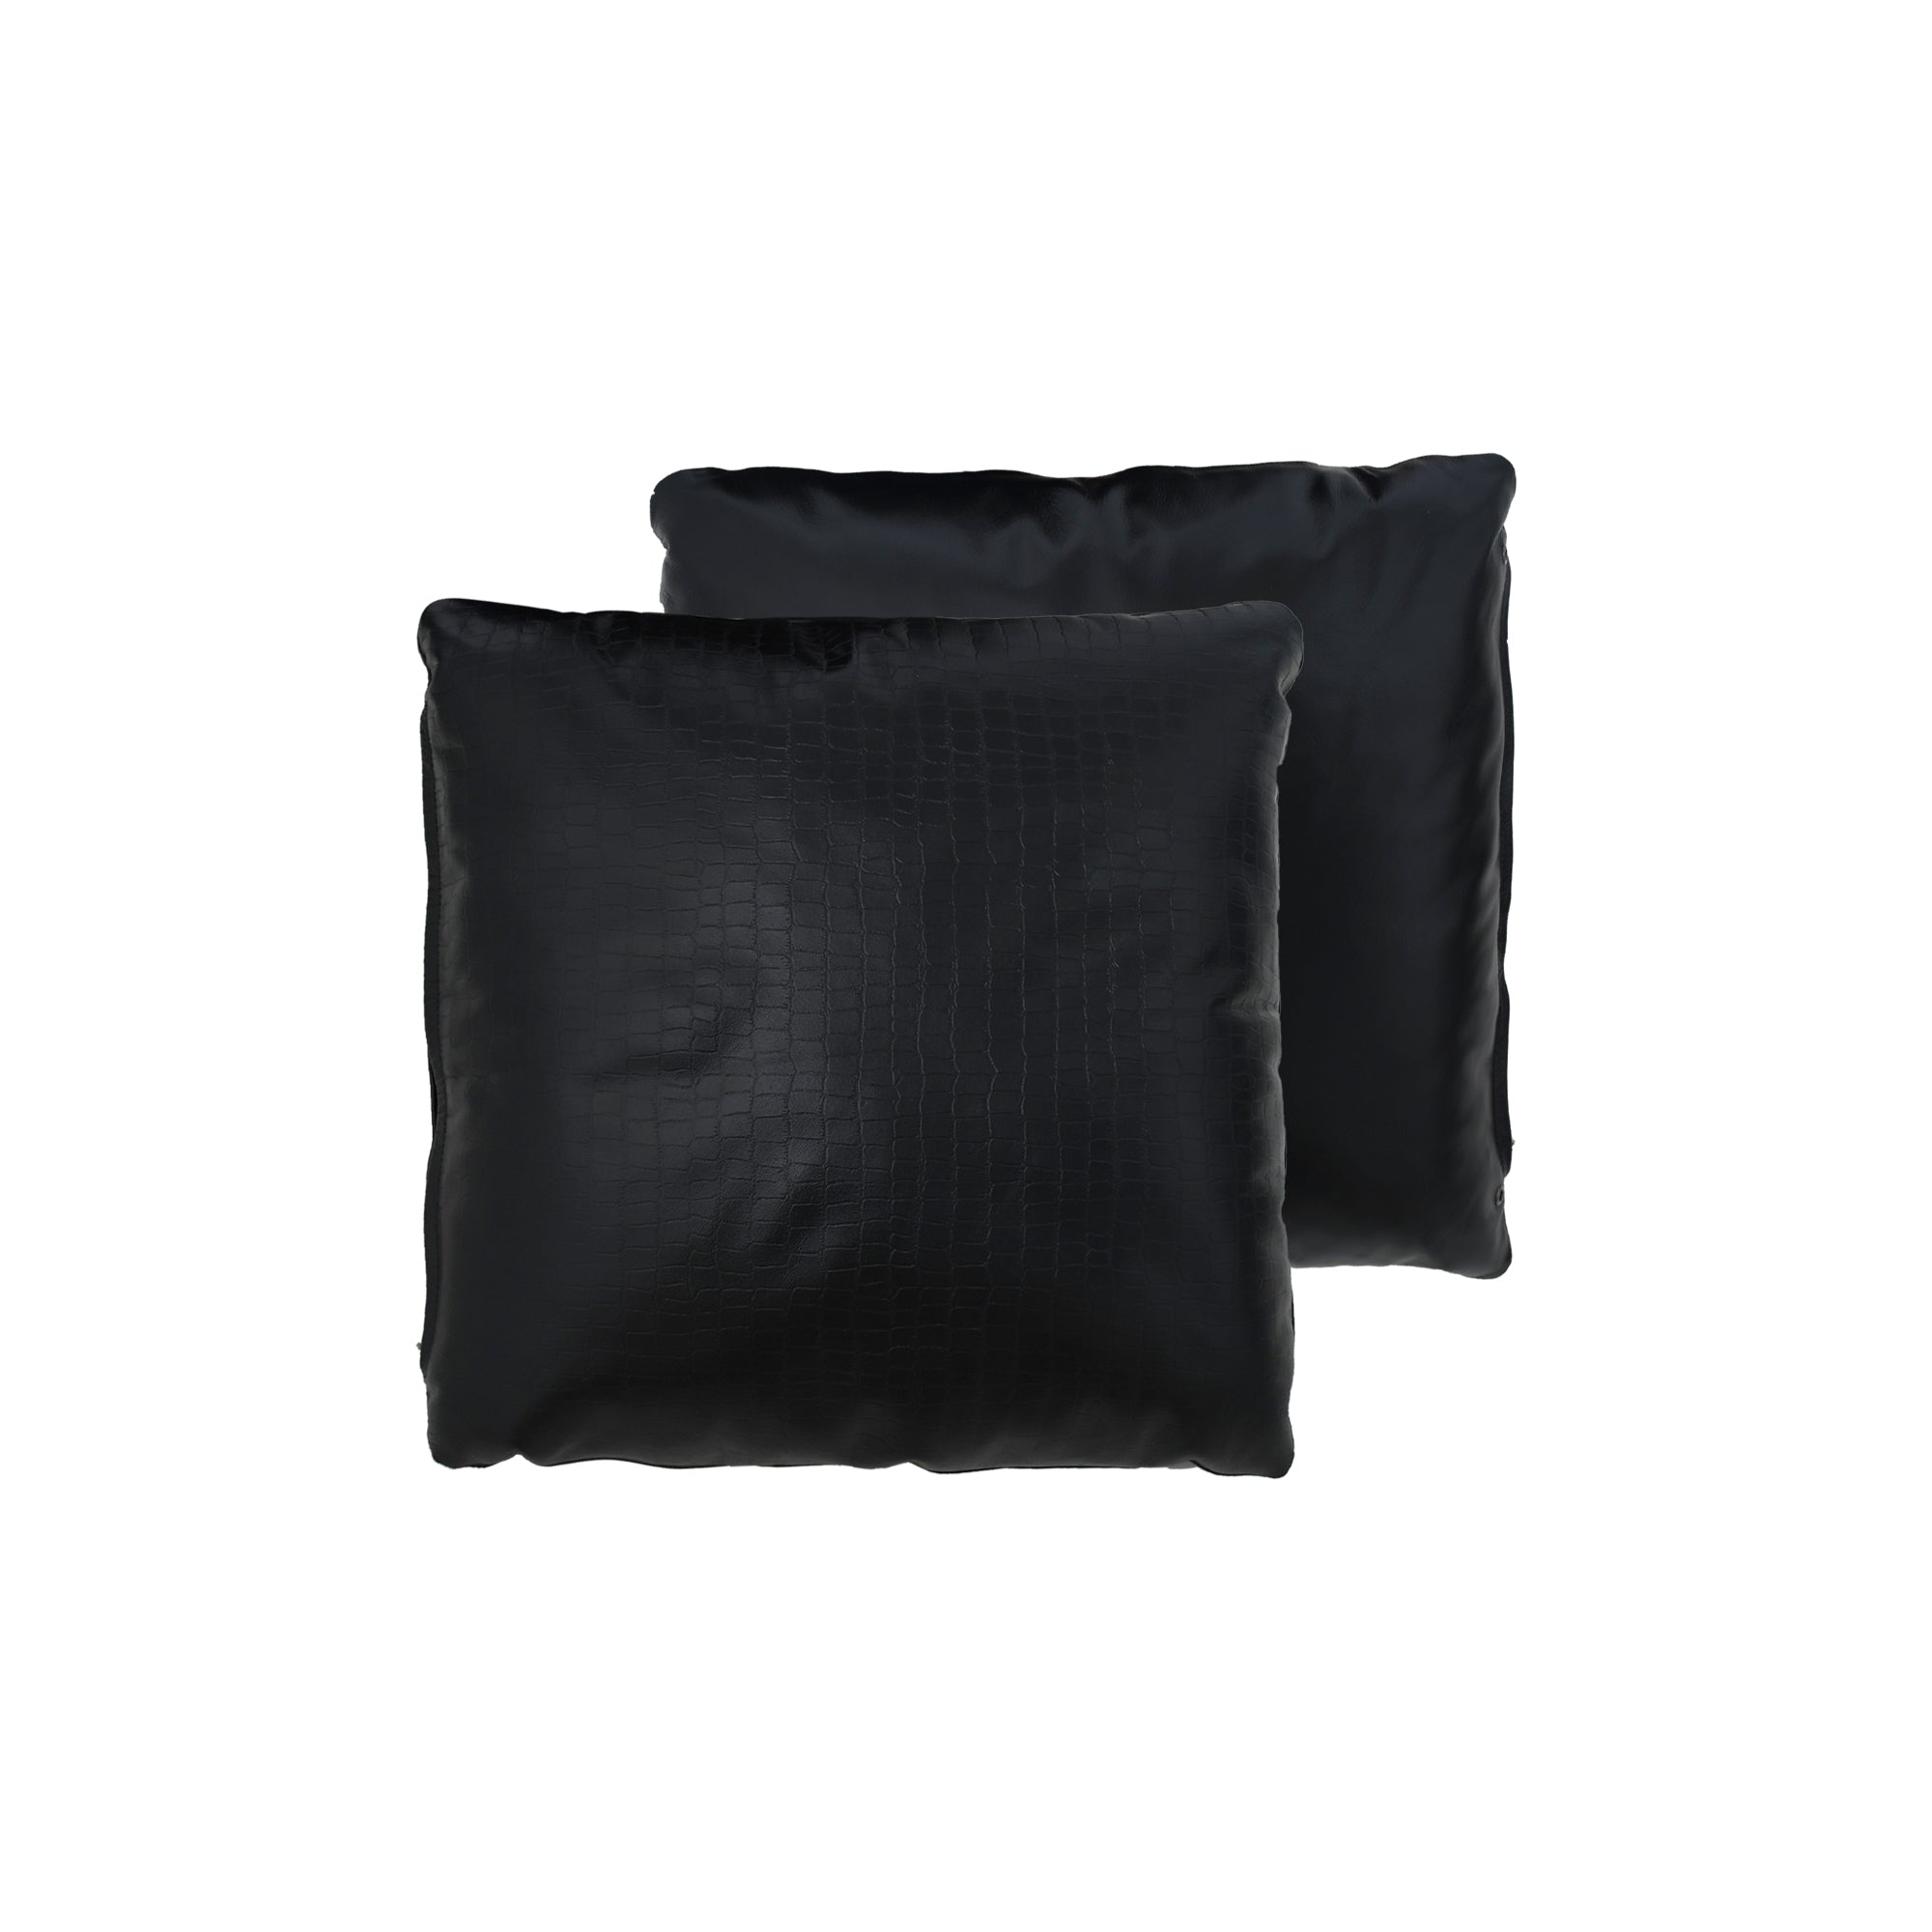 Black Coracoidal Embossed Leather Throw Pillows Front and Back